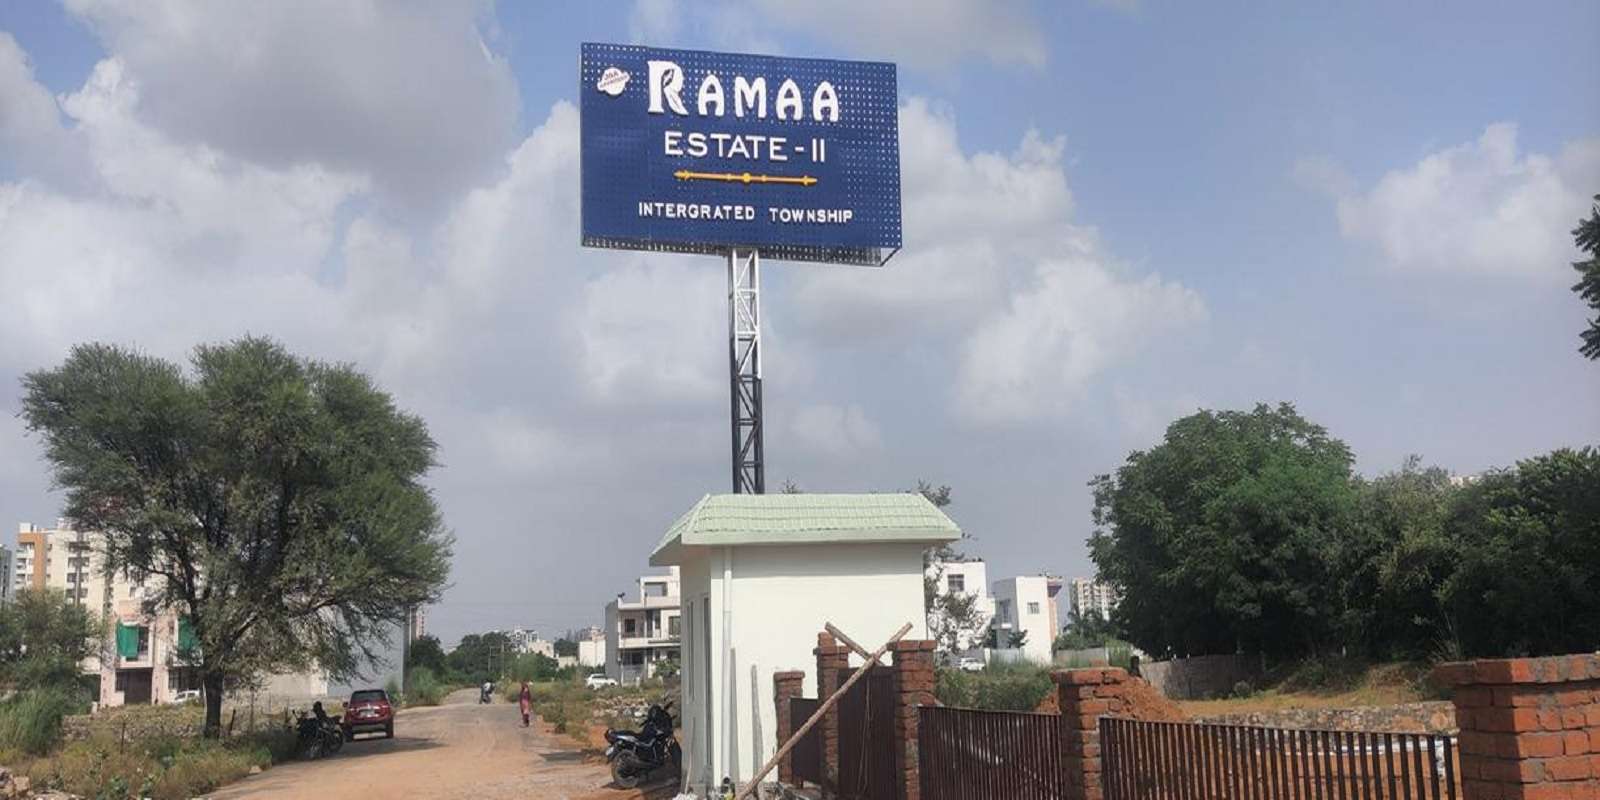 KBR Ramaa Estate Cover Image